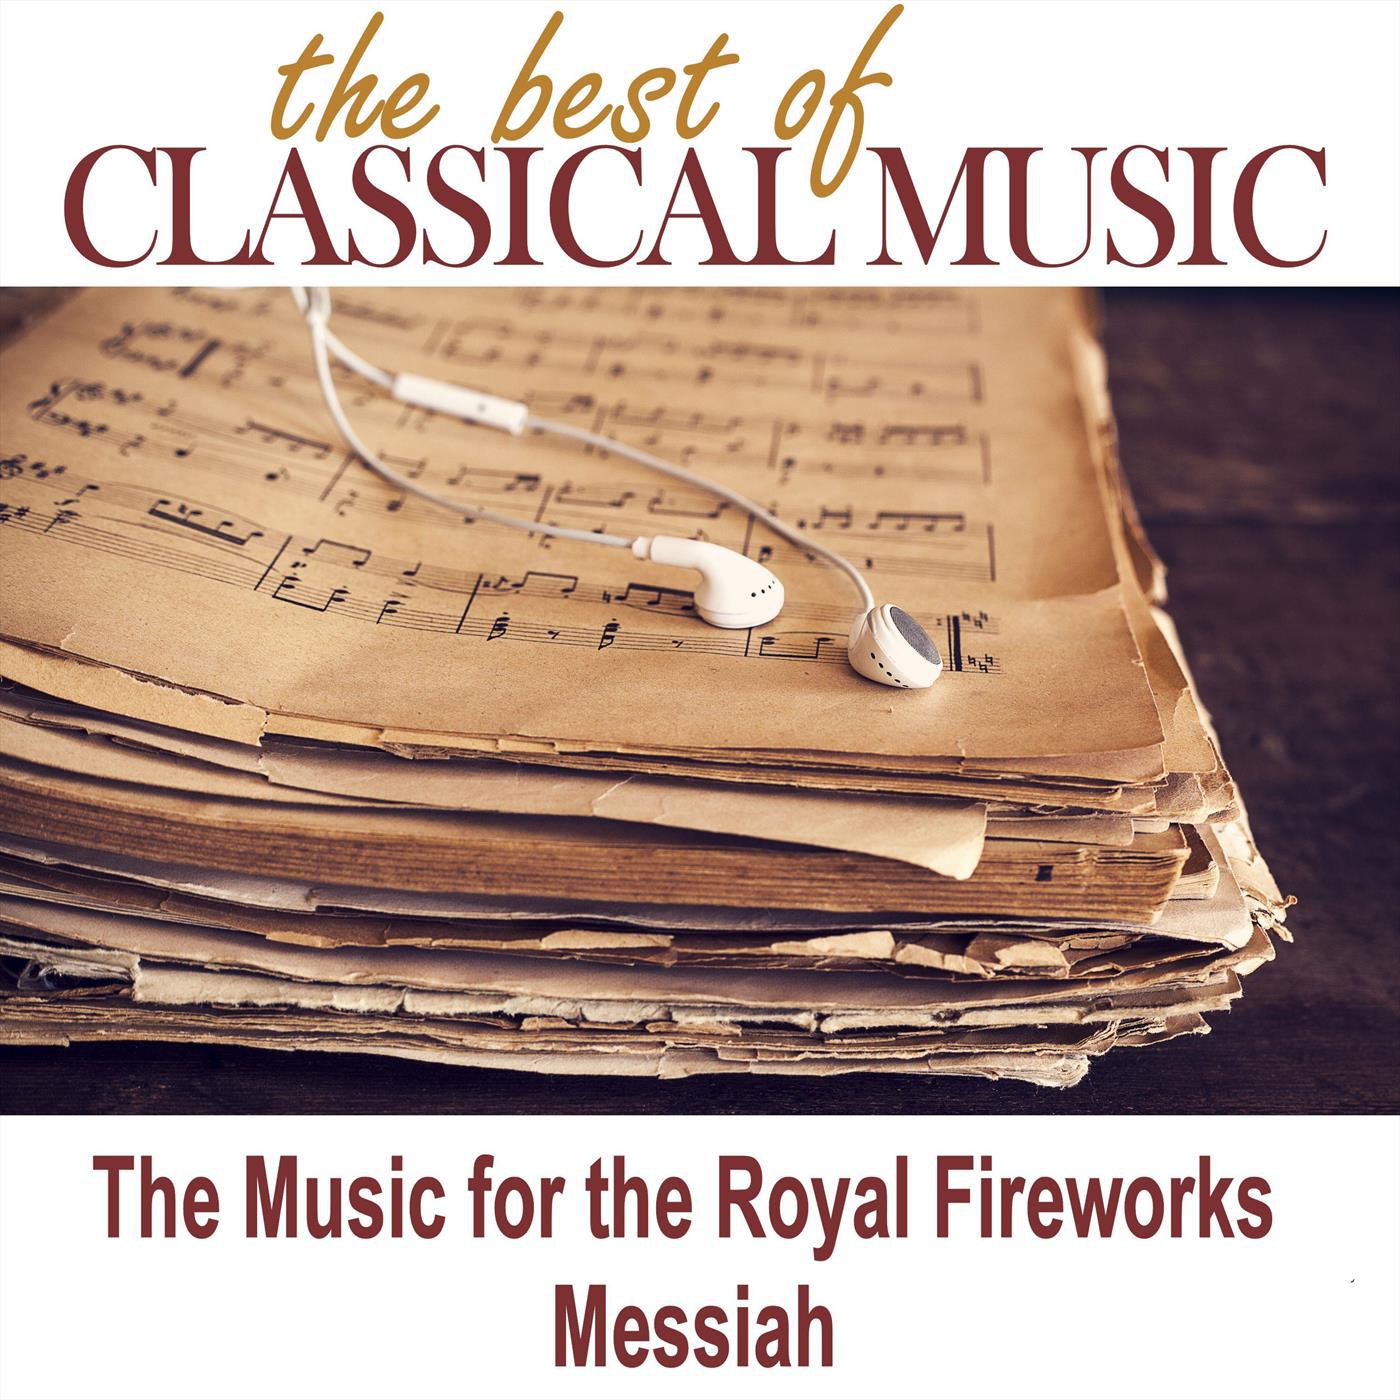 Bourree  The Music for the Royal Fireworks  Concerto Grosso No. 26 in D major H ndel